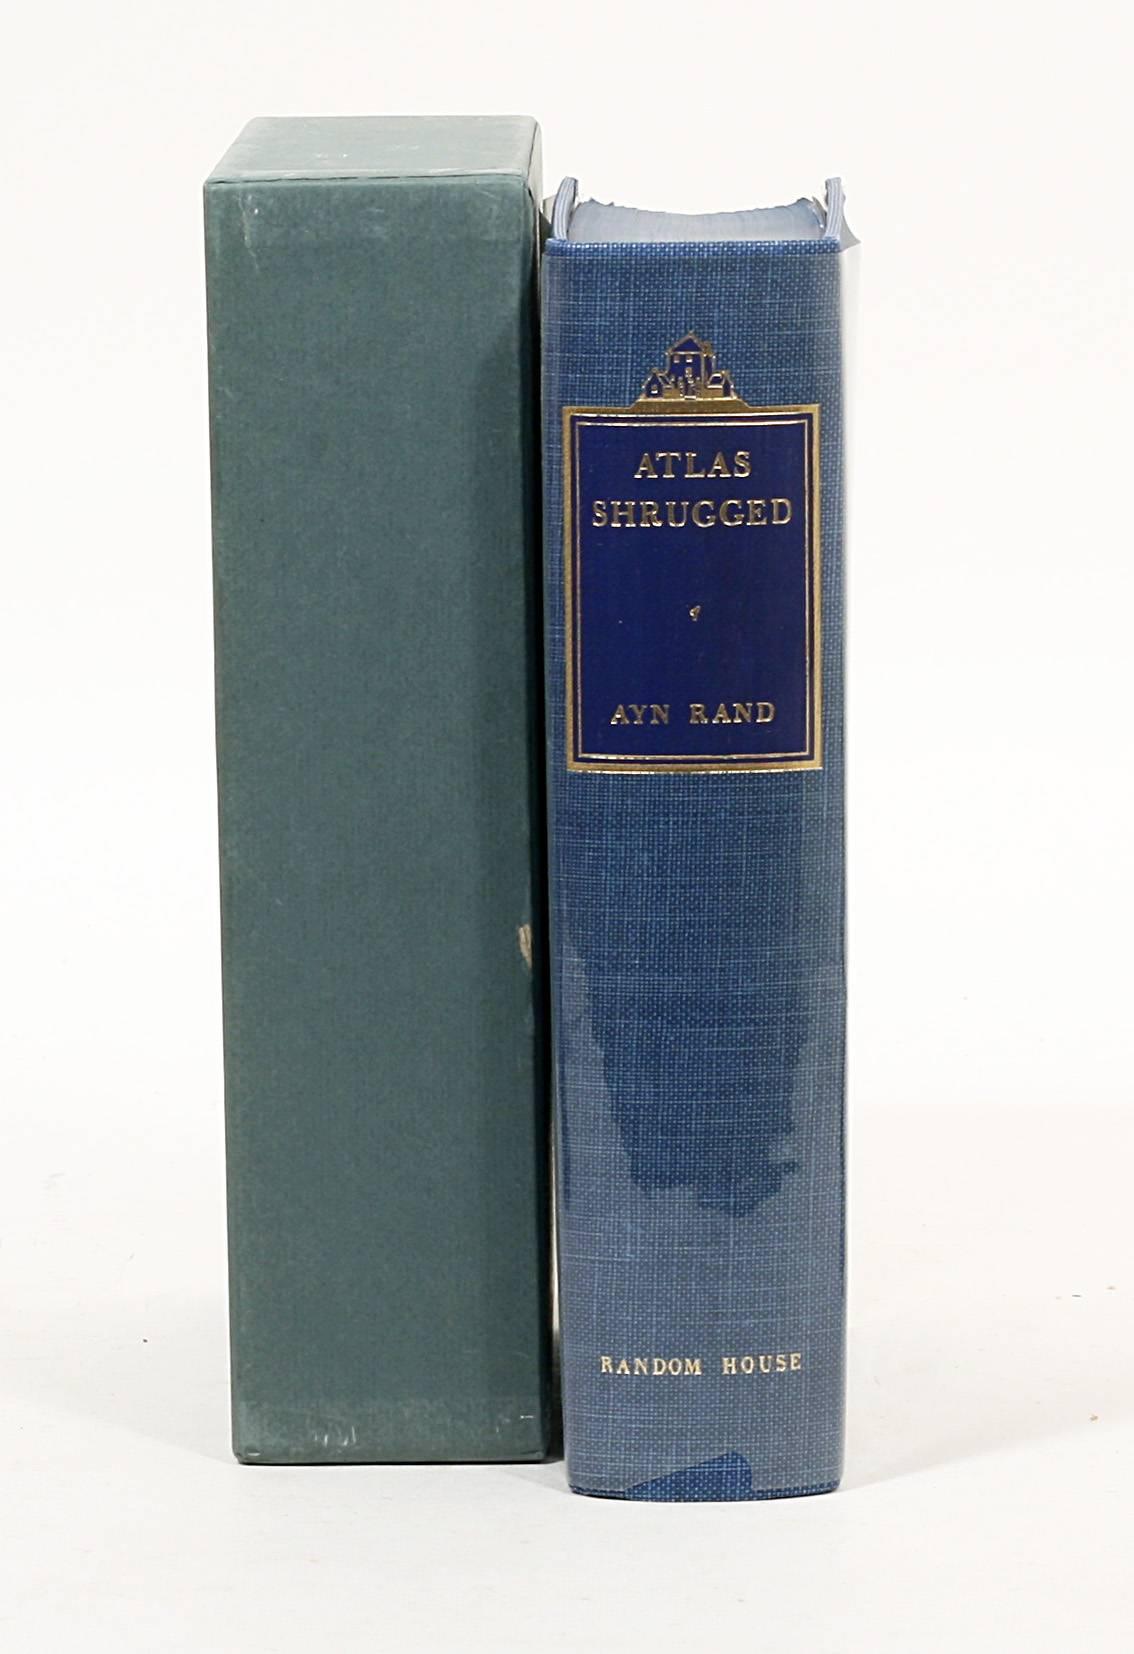 North American Signed Limited Edition of Ayn Rand's Atlas Shrugged